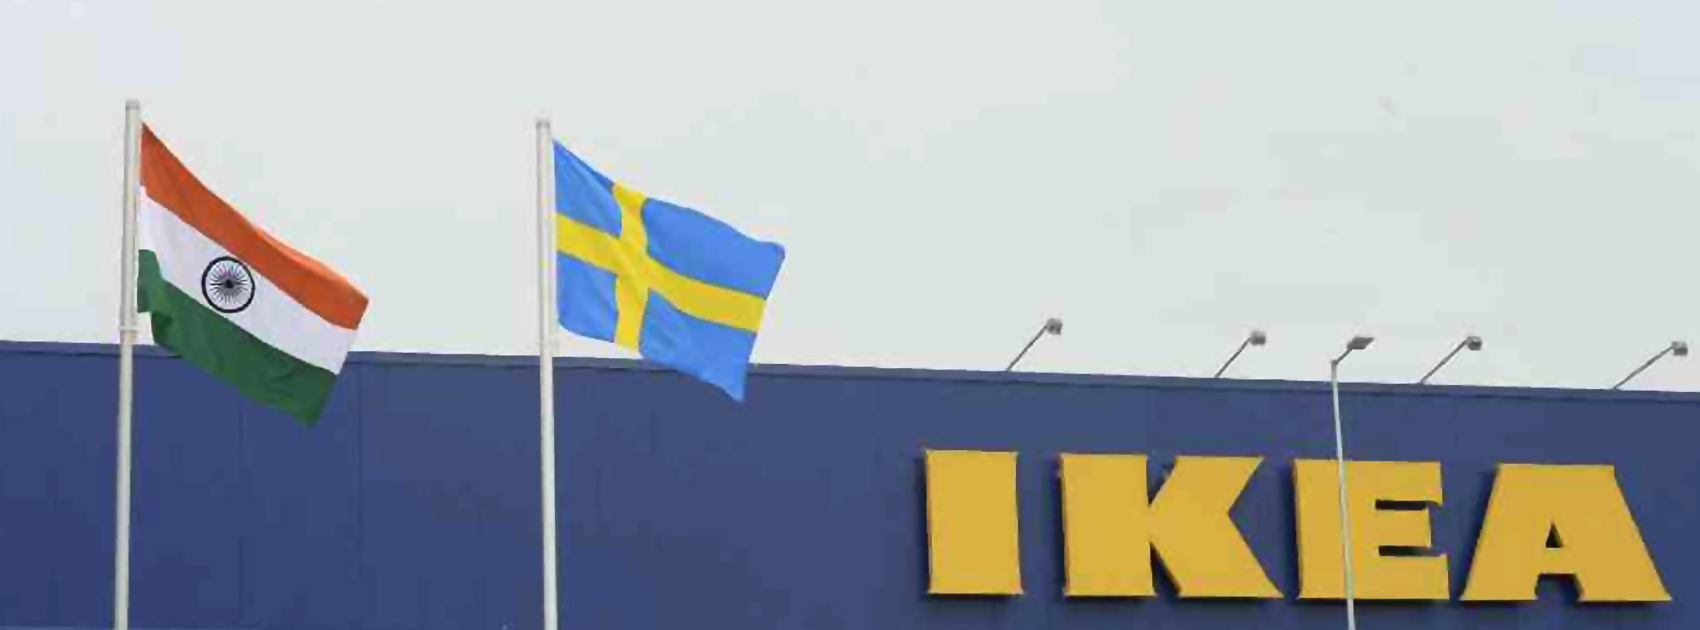 How IKEA India Is Different,Startup Stories,Startup News India,Latest Business News 2018,IKEA India Store,IKEA First India Store,IKEA First Store in Hyderabad,Largest Furniture Retailer IKEA,India First Ever IKEA Store,IKEA India Latest News